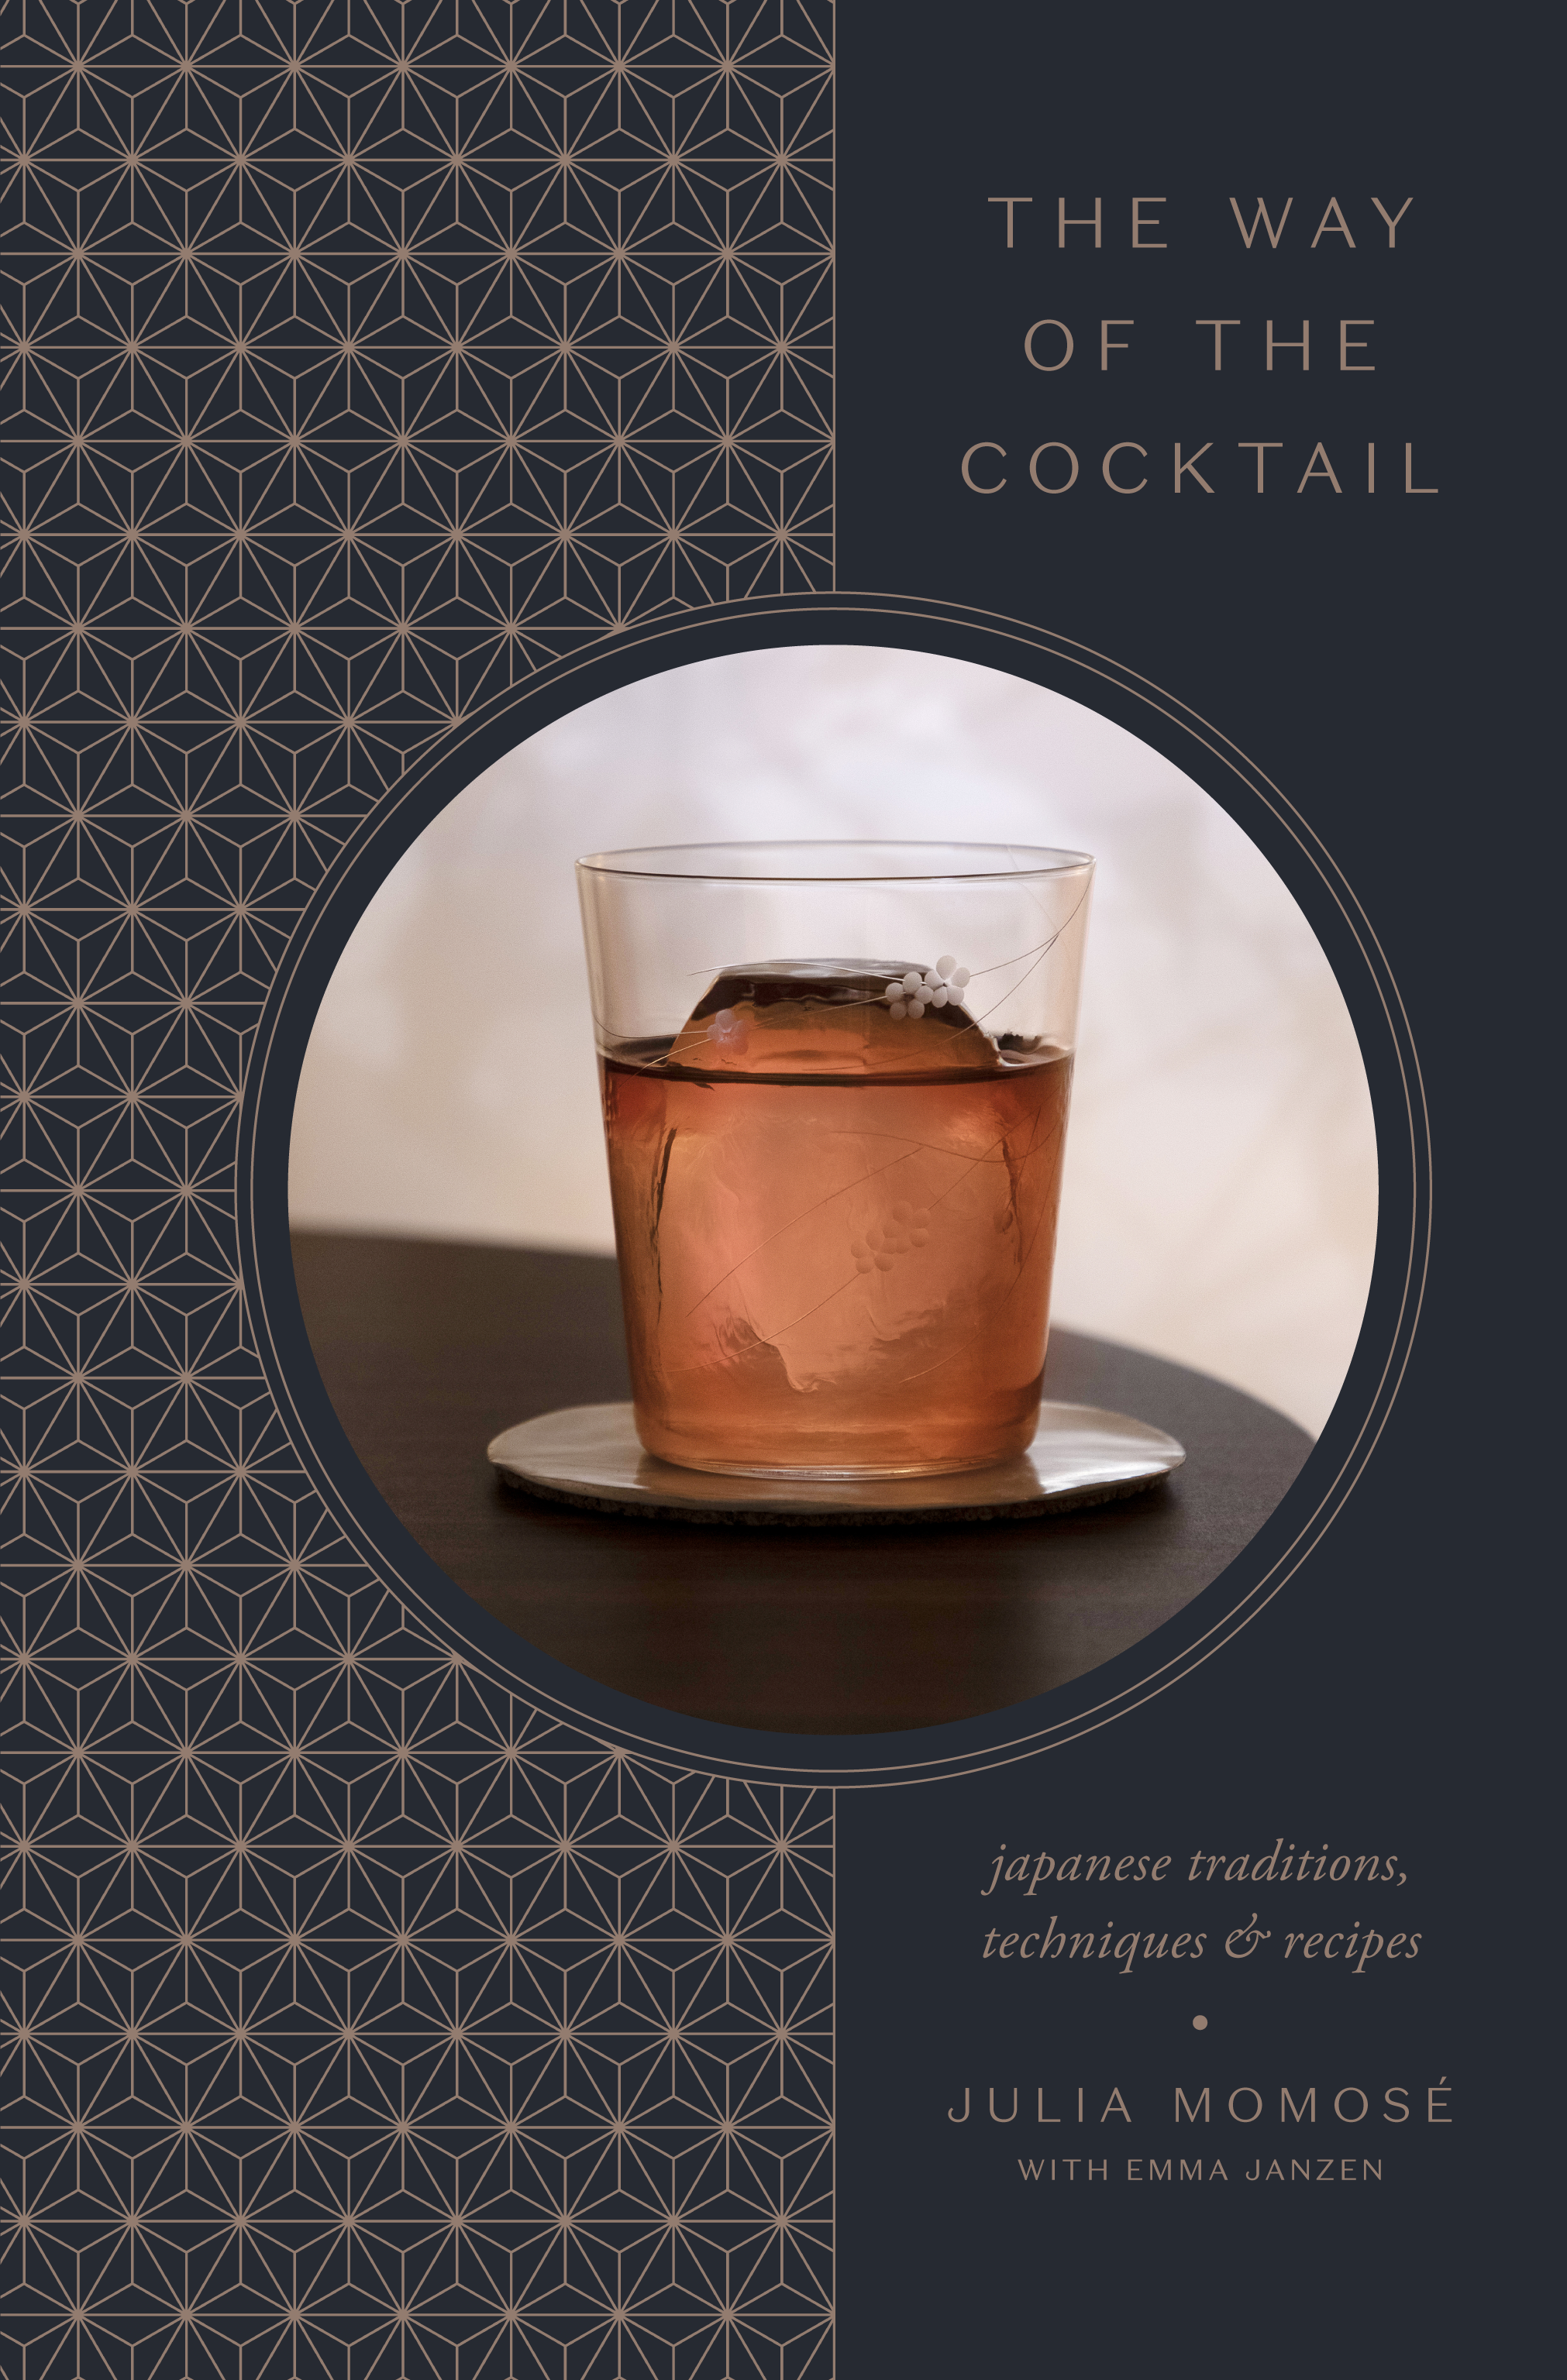 “The Way of the Cocktail: Japanese Traditions, Techniques, and Recipes,” by Julia Momosé and Emma Janzen.
